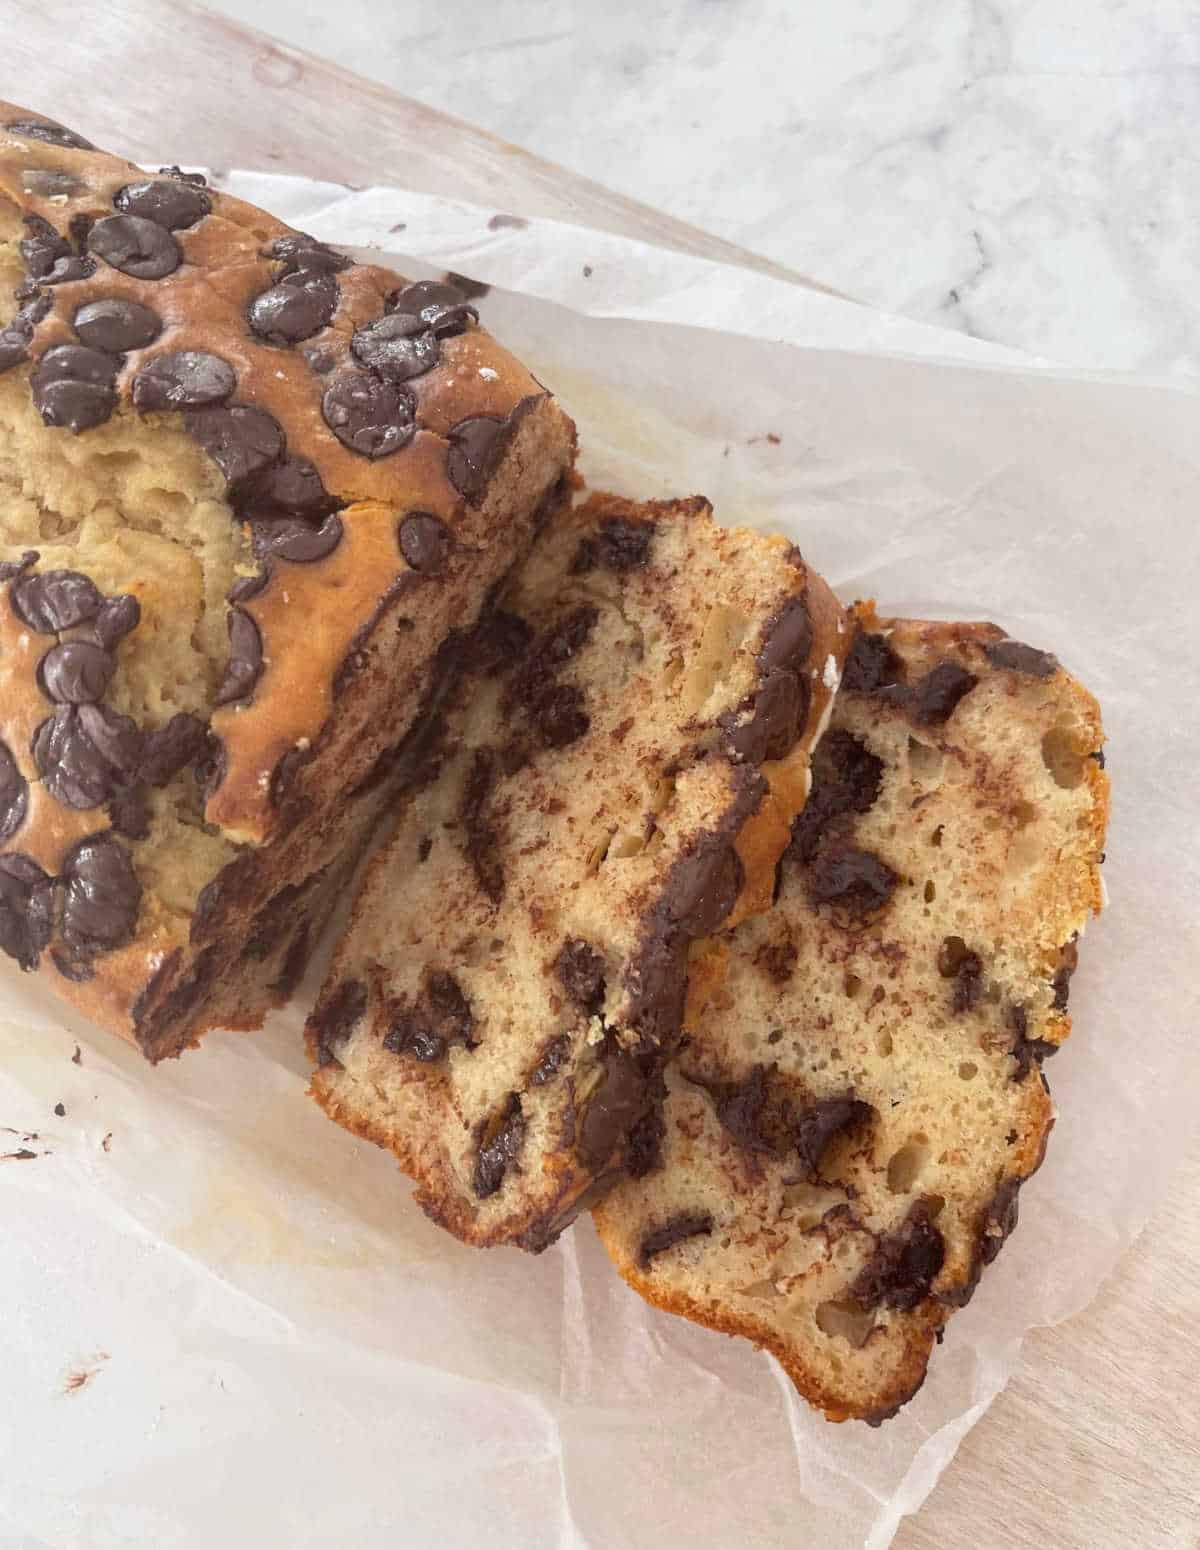 sliced chocolate chip banana bread on a wooden board.